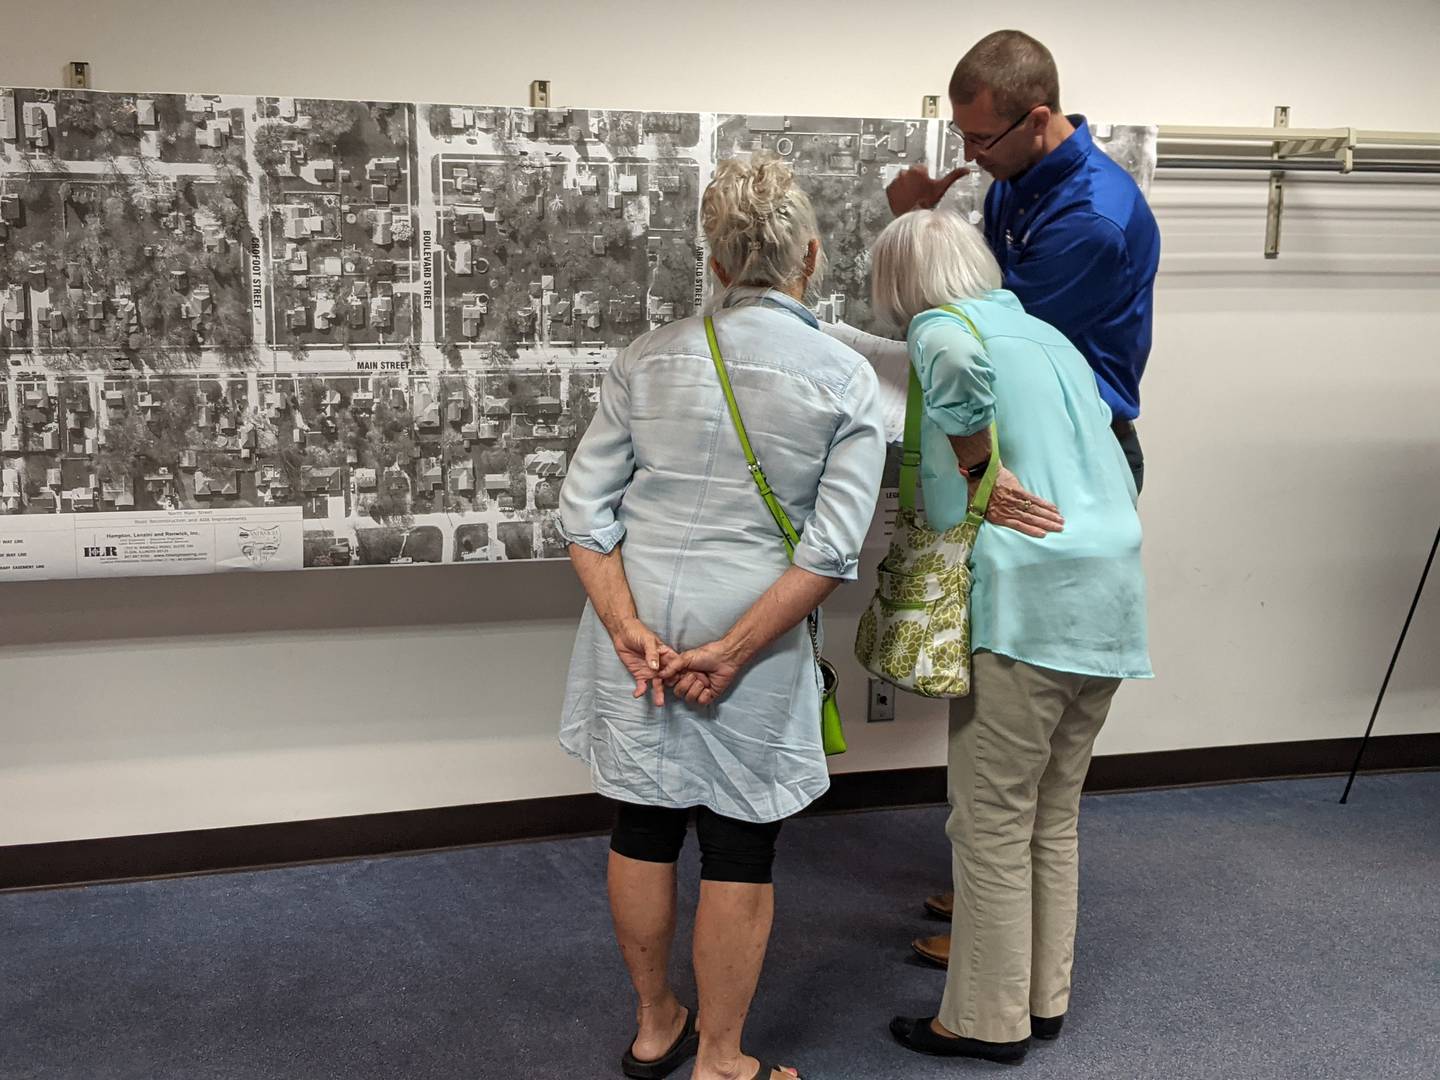 Troy Strange, right, of civil engineering company Hampton, Lenzini and Renwick, Inc., talks about the planned reconstruction of North Main Street in Sandwich during a June 26 open house.